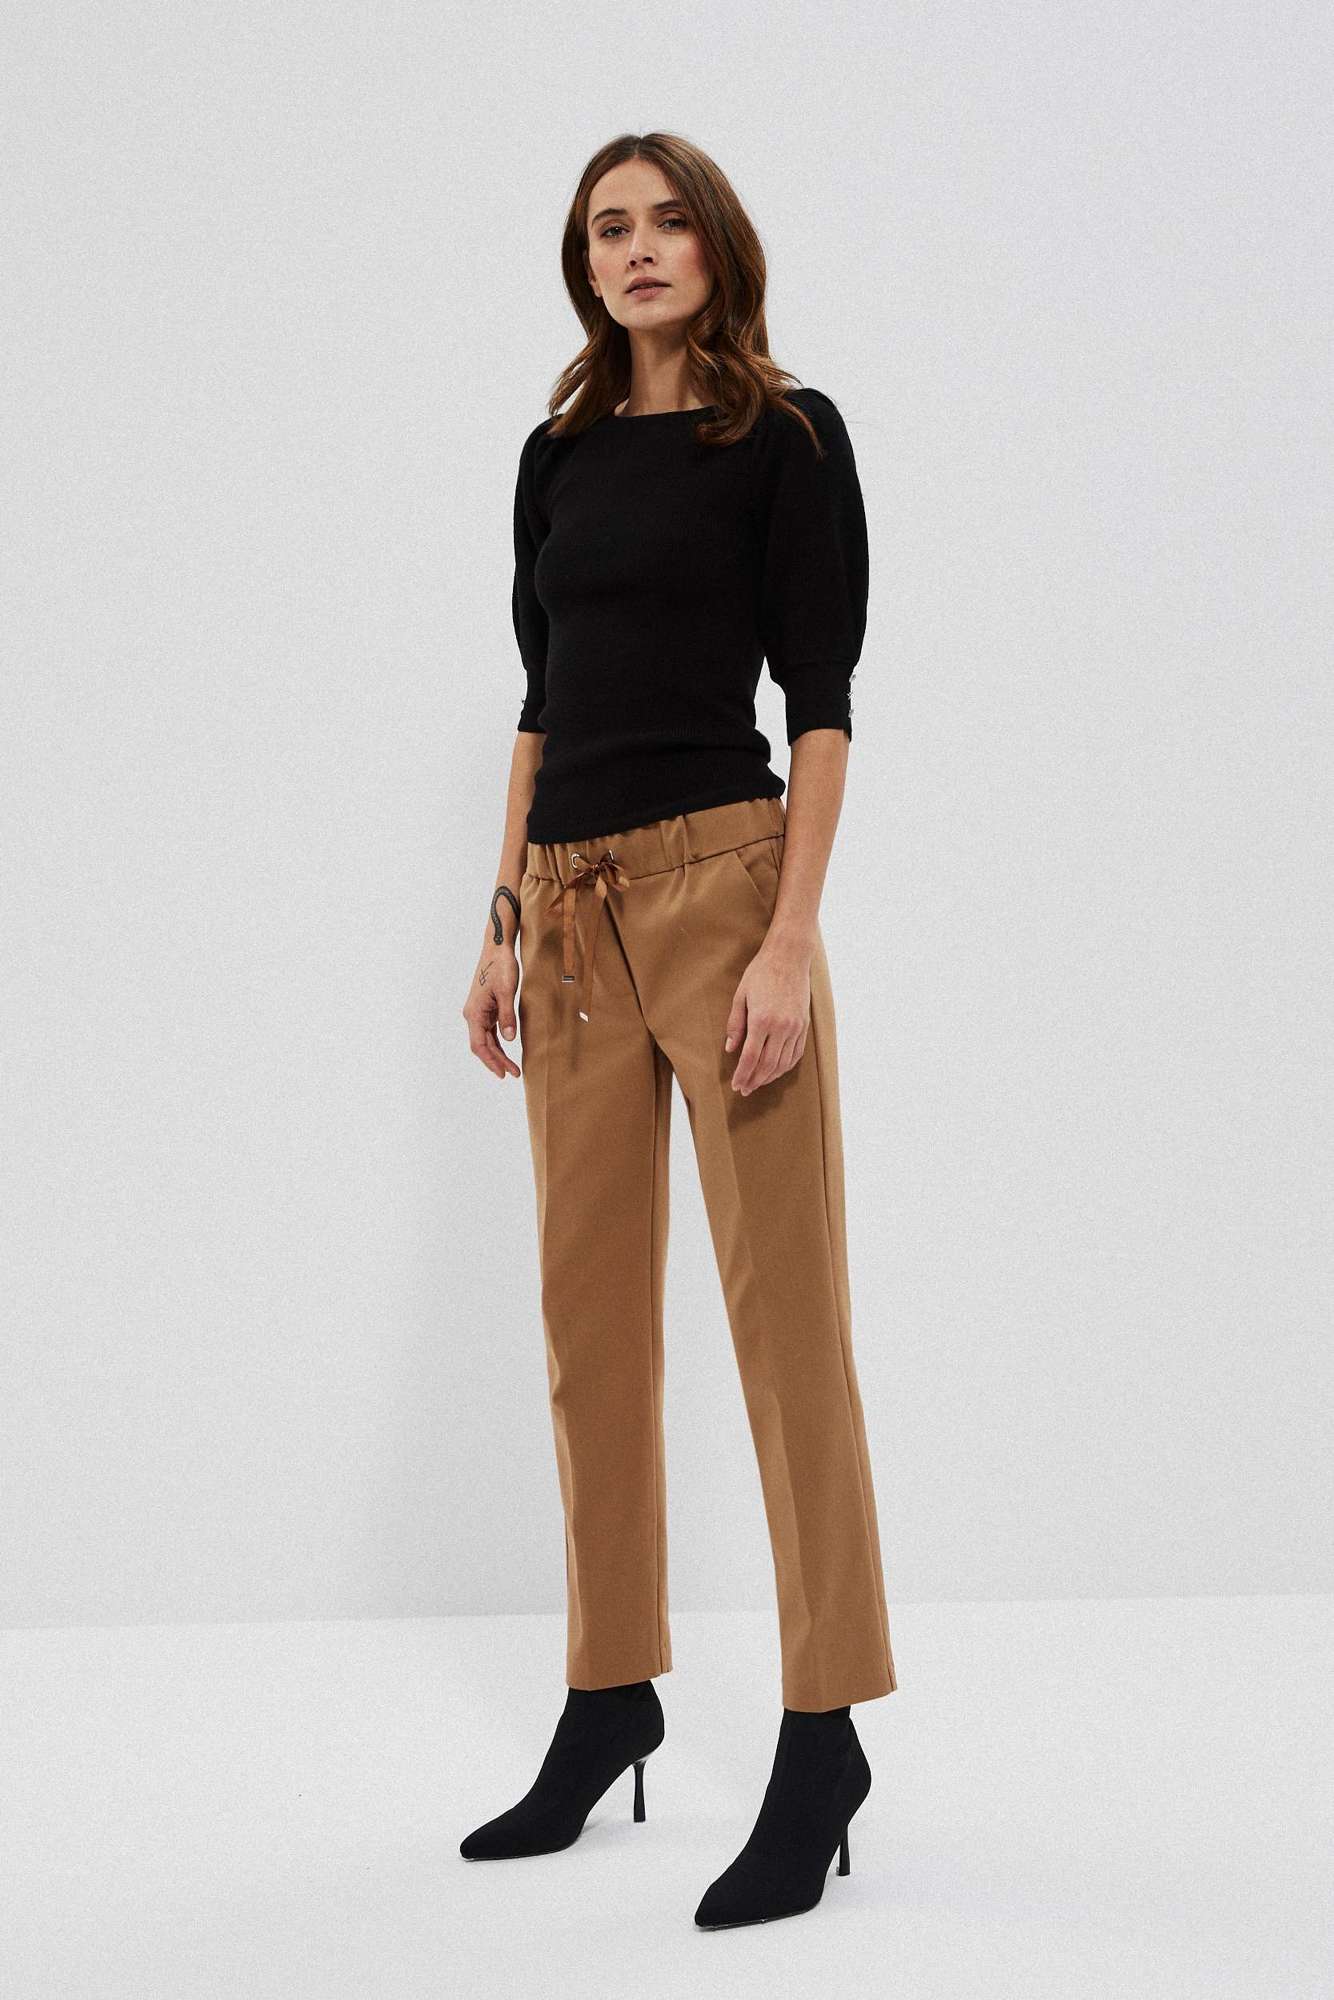 CIGARILLLET TROUSERS - Beige